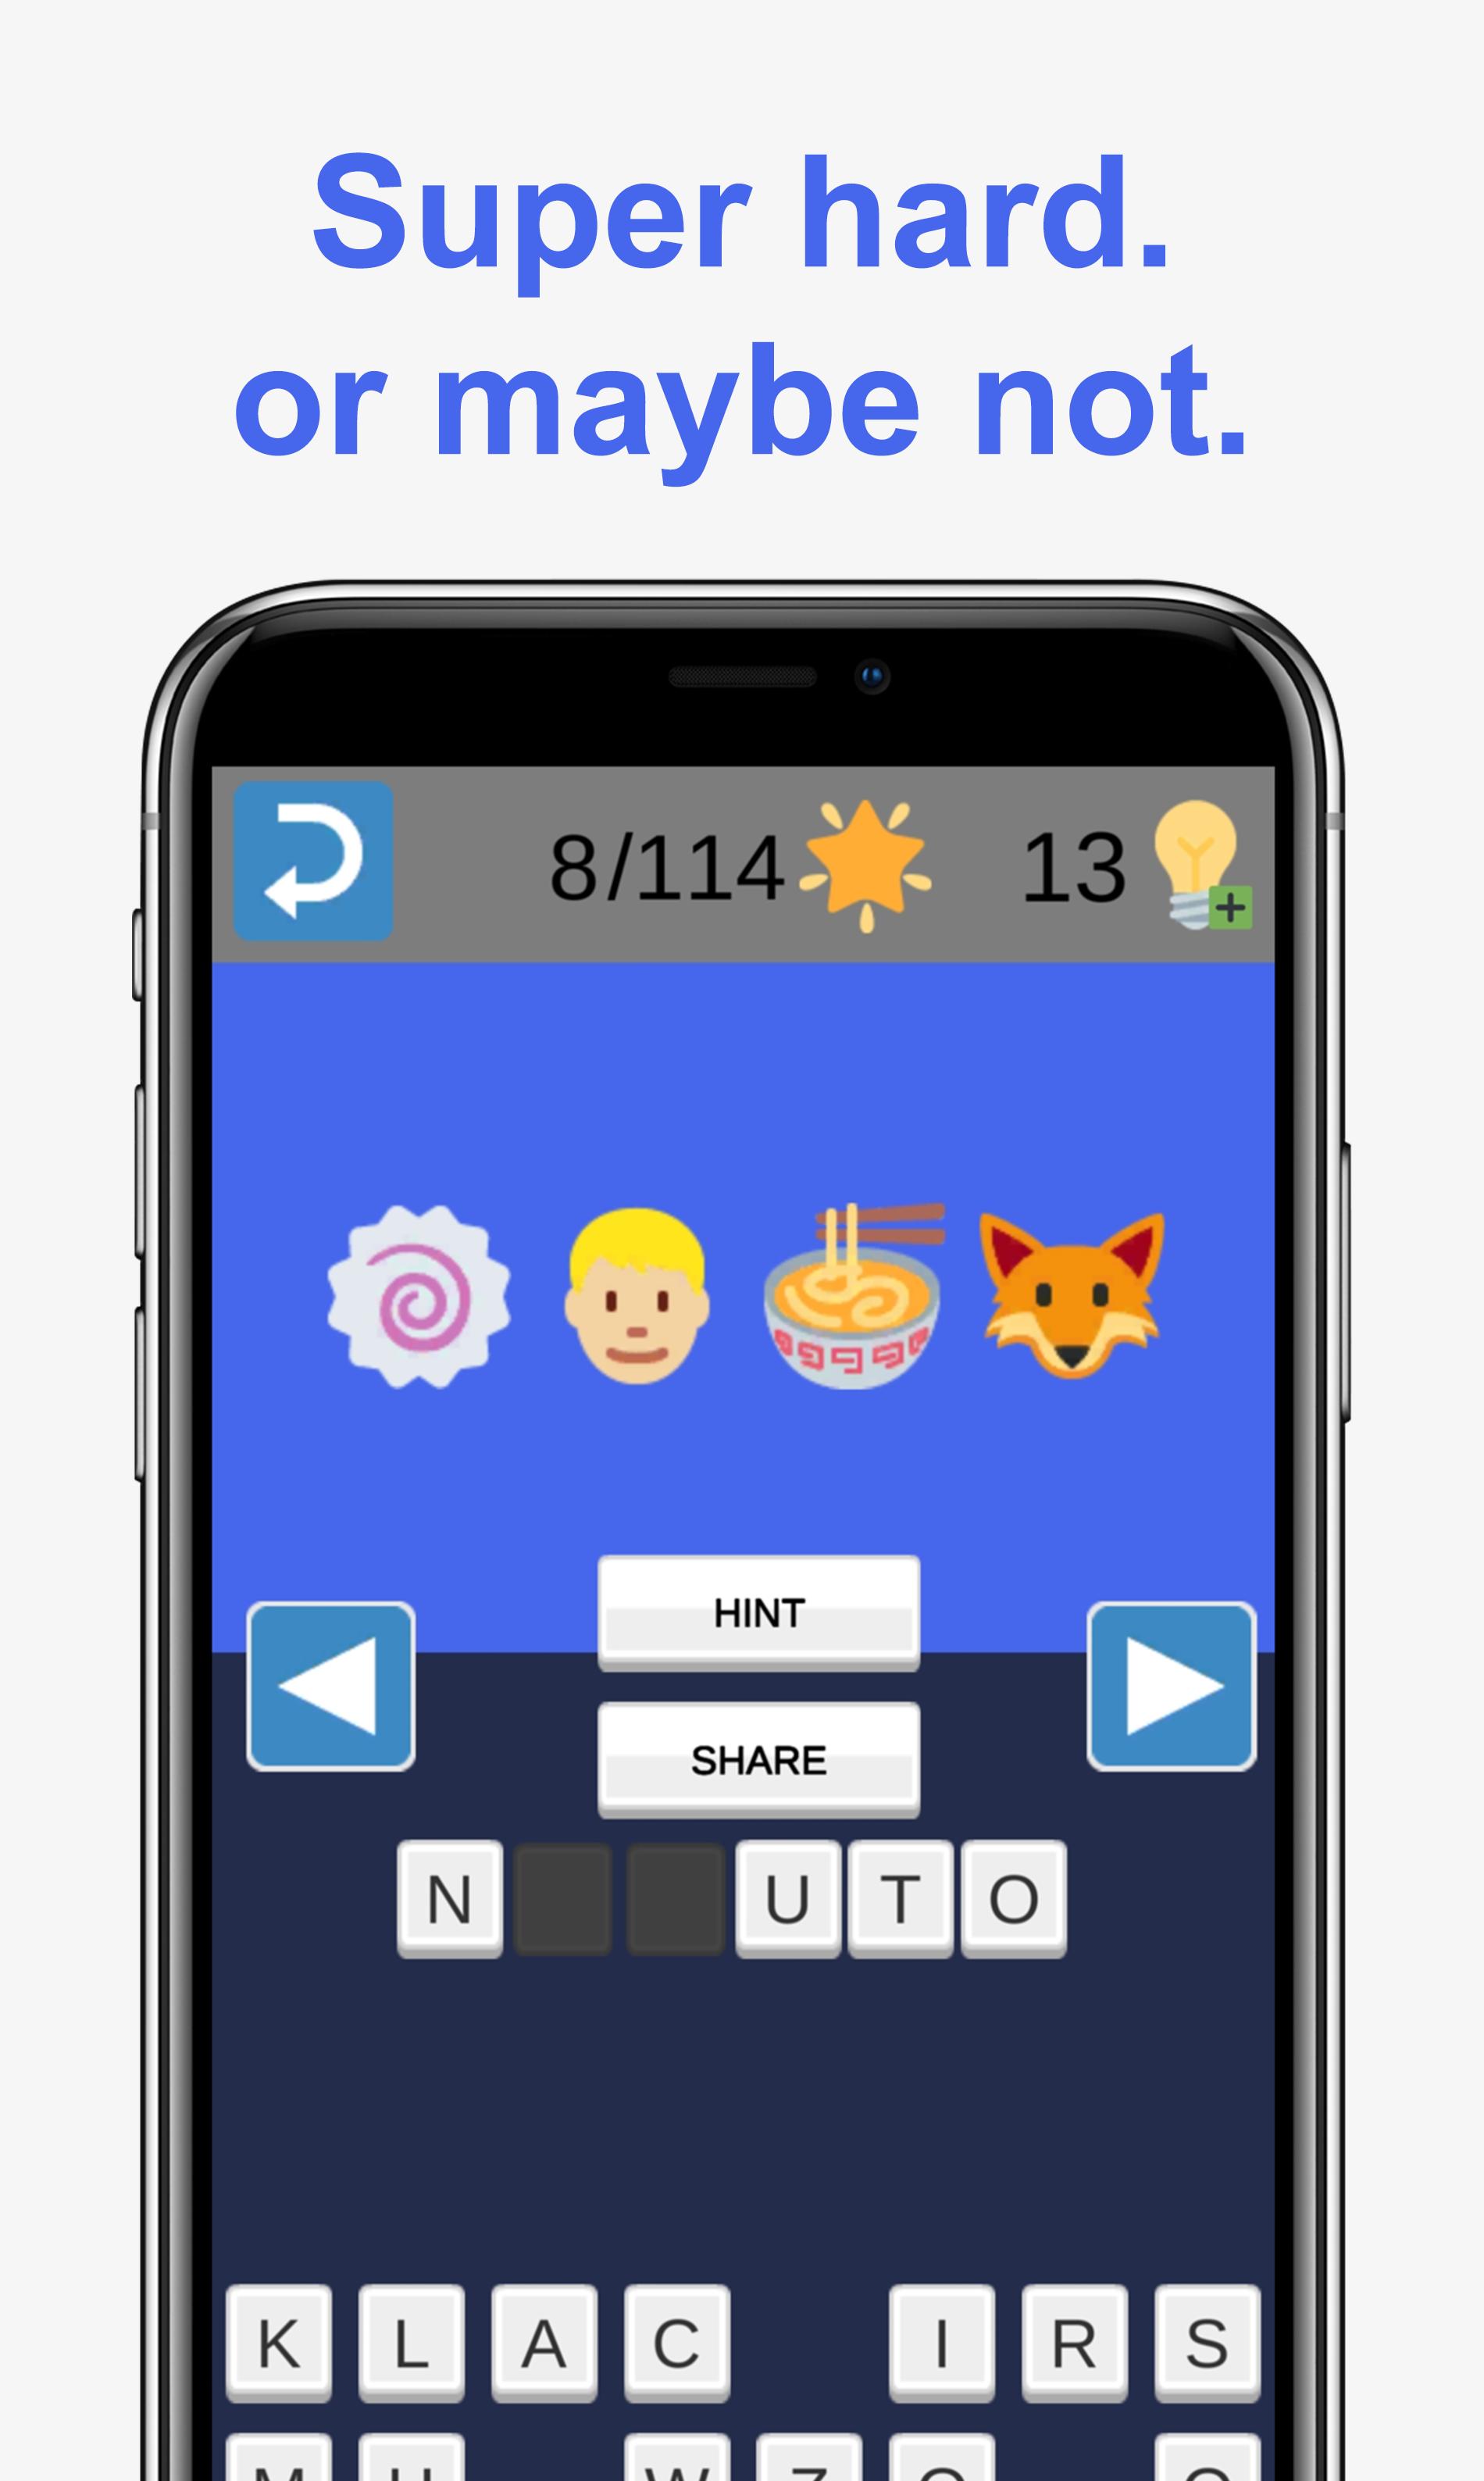 Guess the anime - Emoji quiz for Android - APK Download